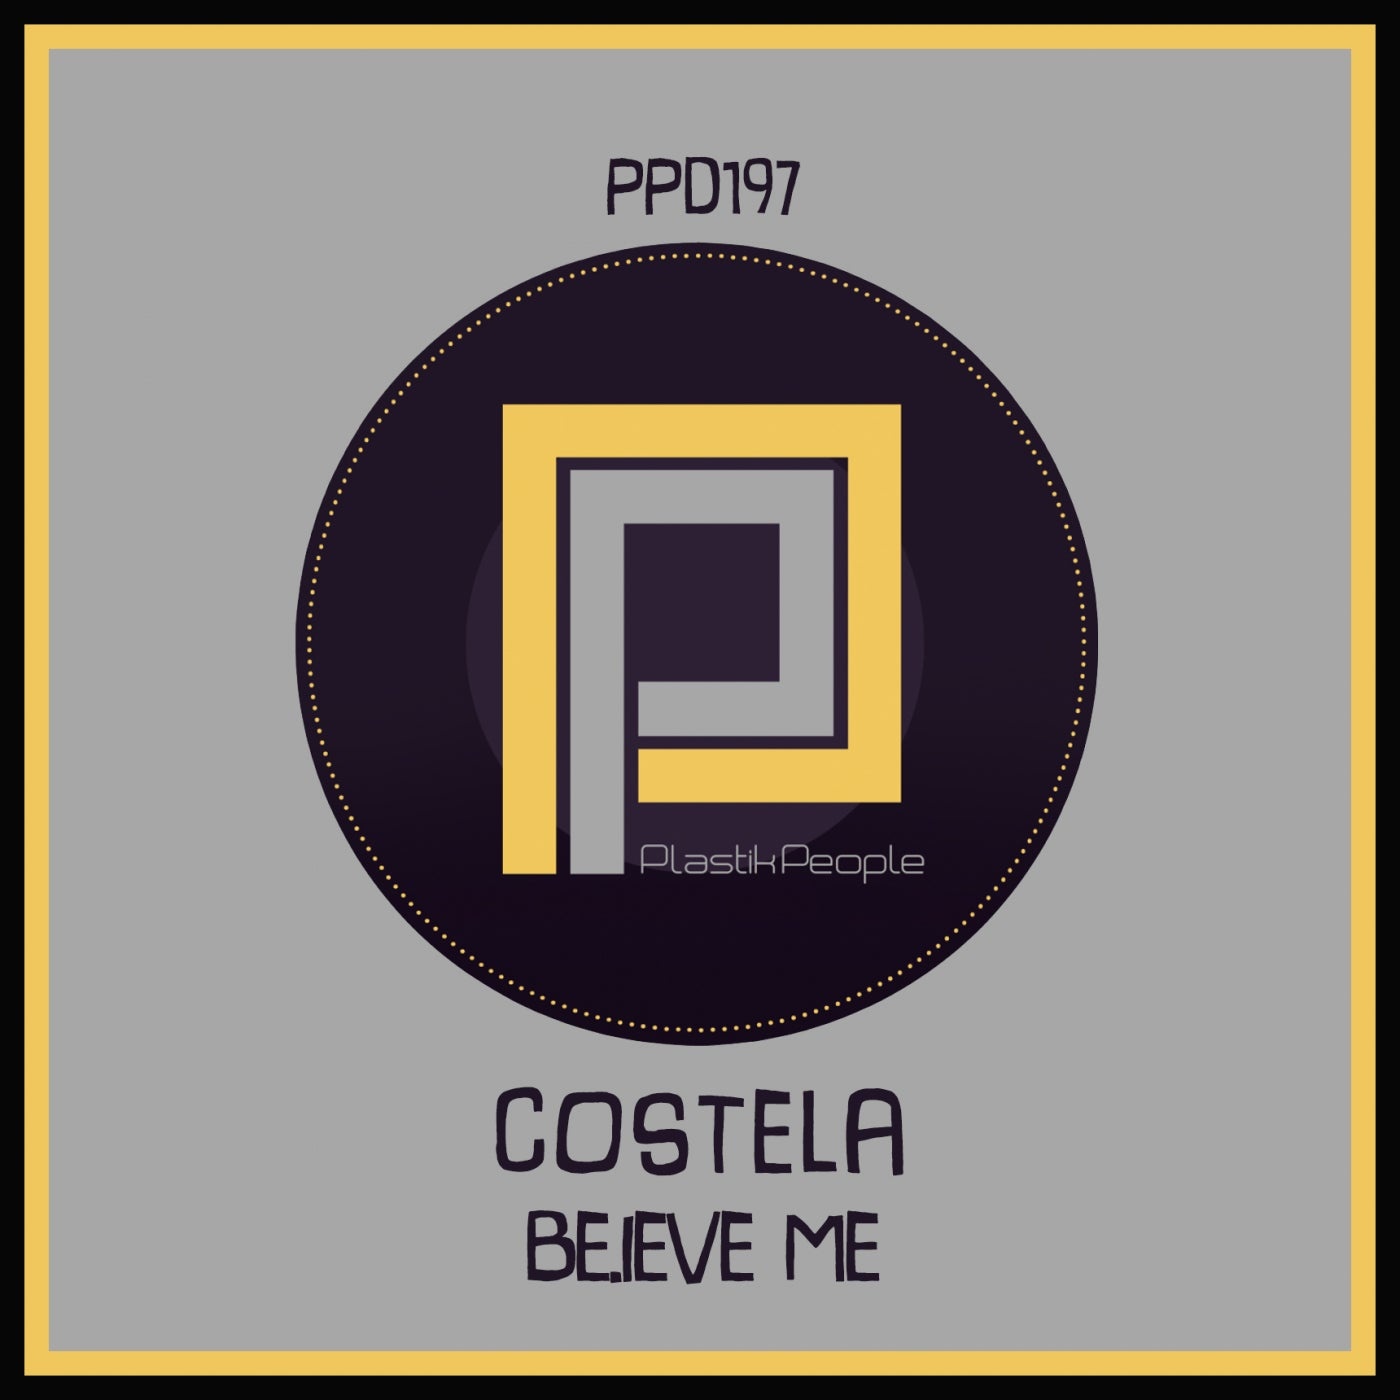 Costela - Believe Me [PPD197]